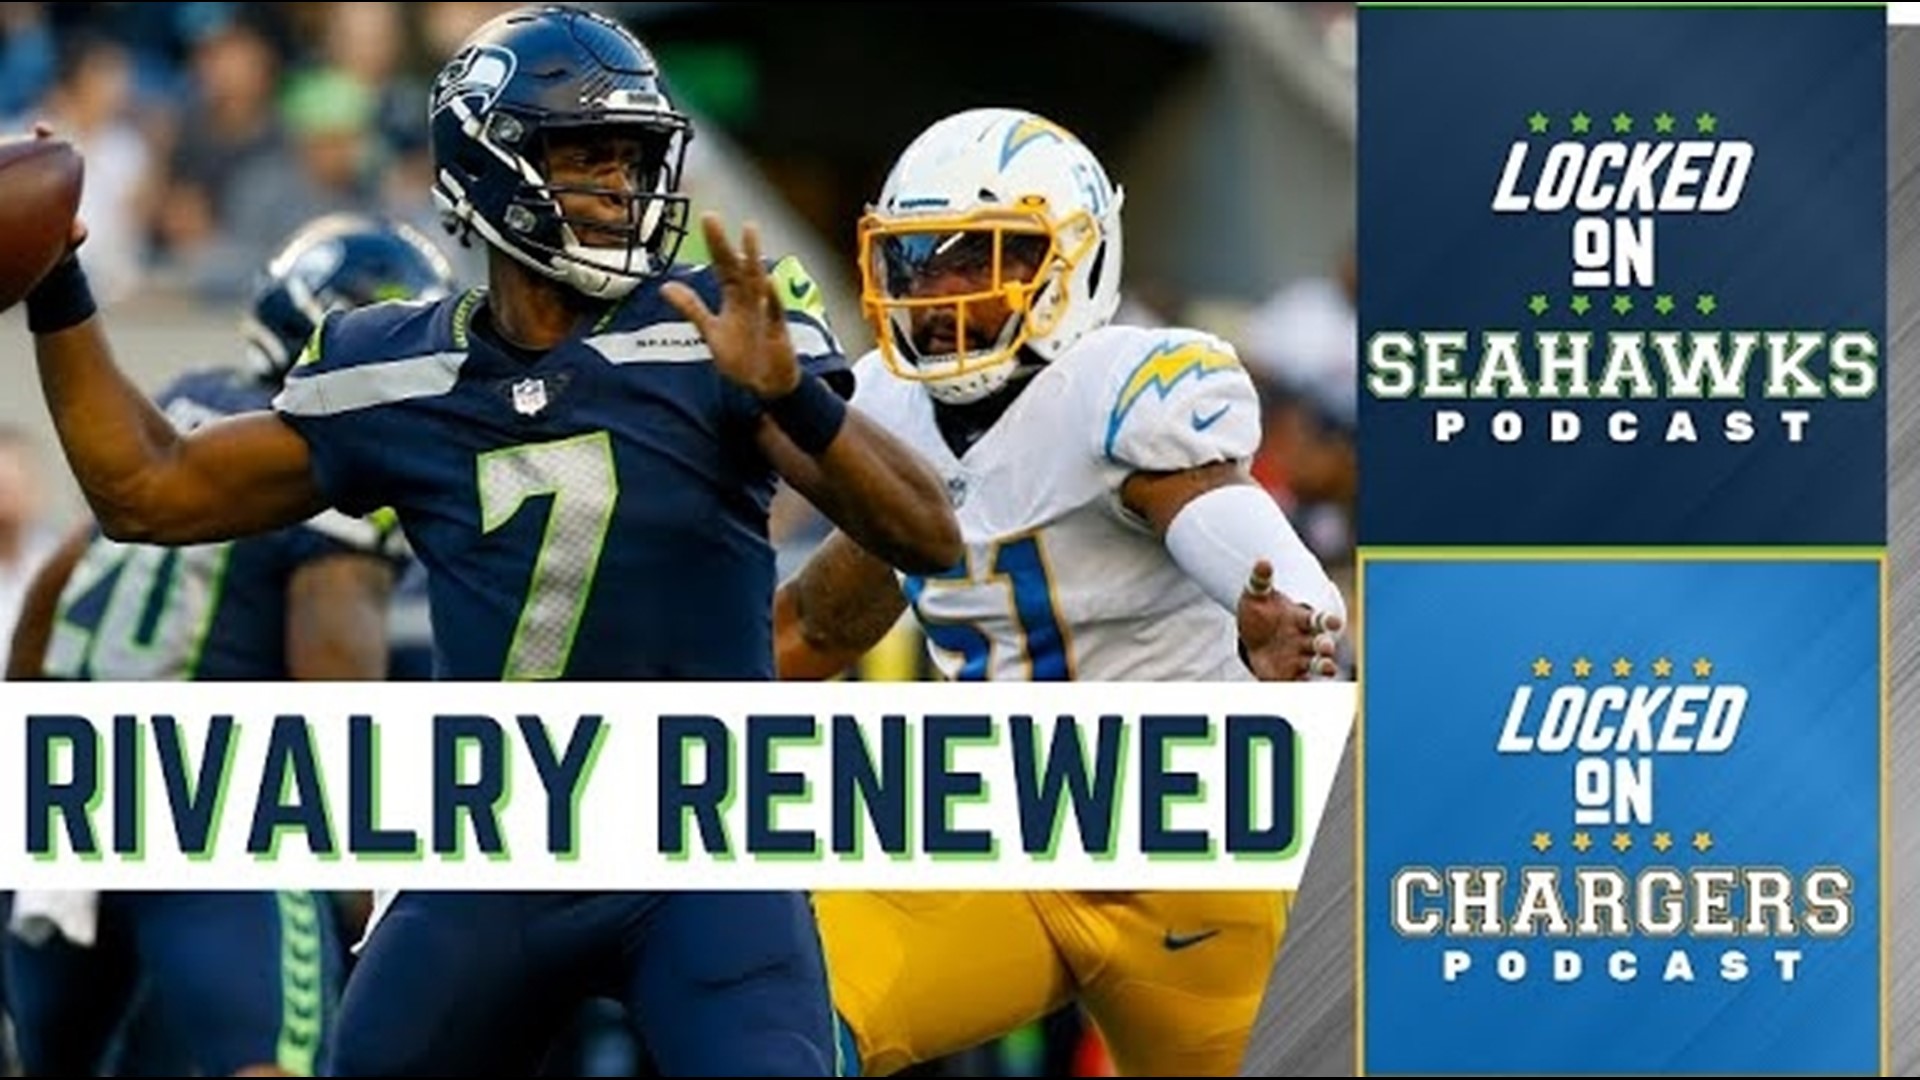 Locked On Seahawks host Corbin Smith and Locked On Chargers host Daniel Wade break down key story lines heading into the contest.